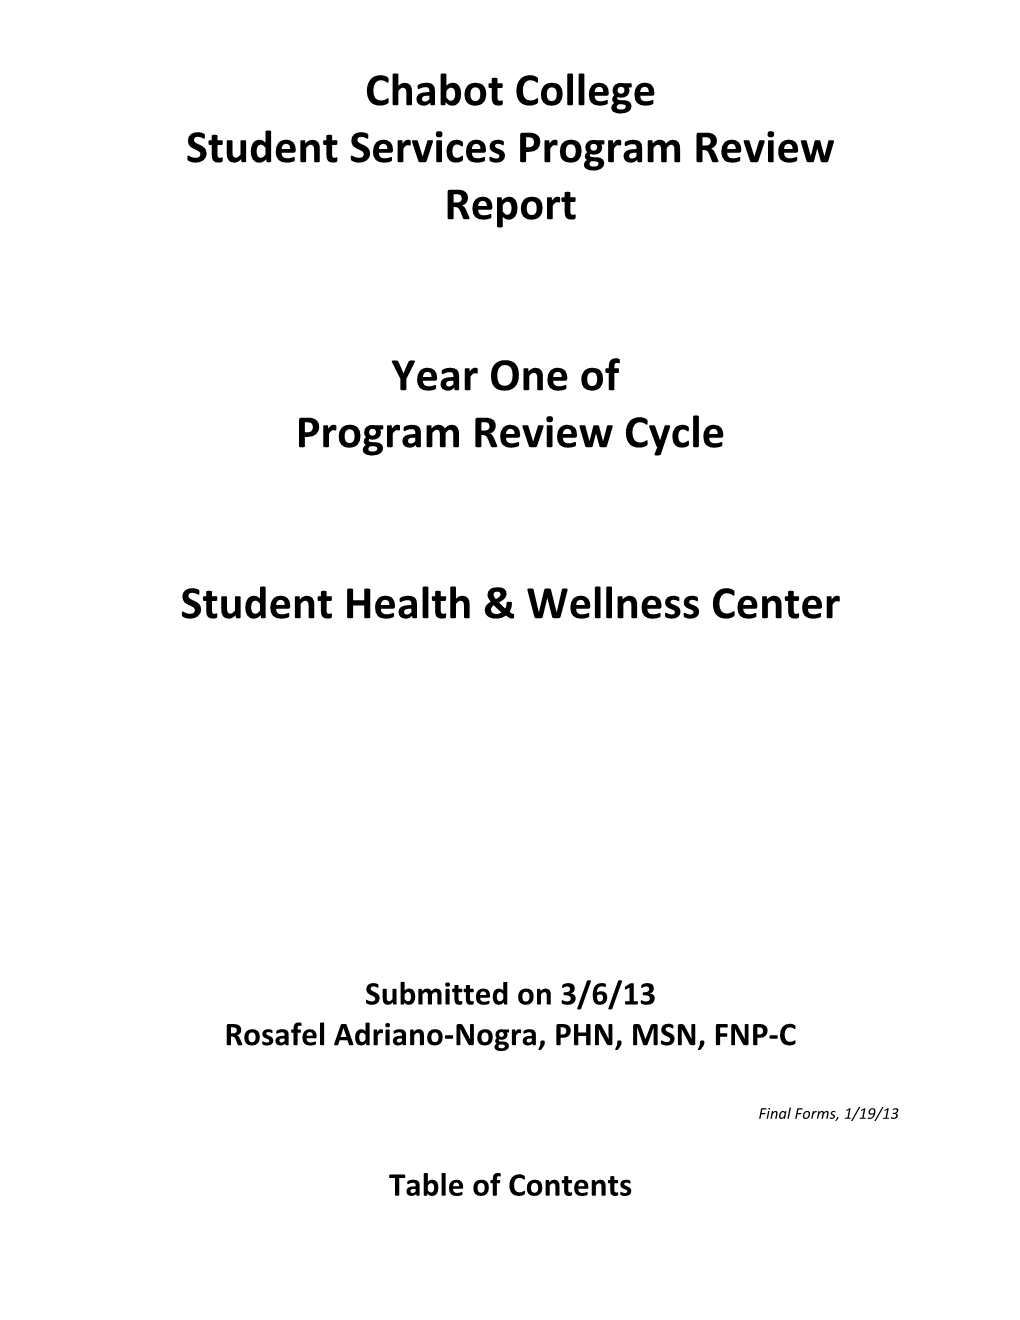 Student Services Program Review Report